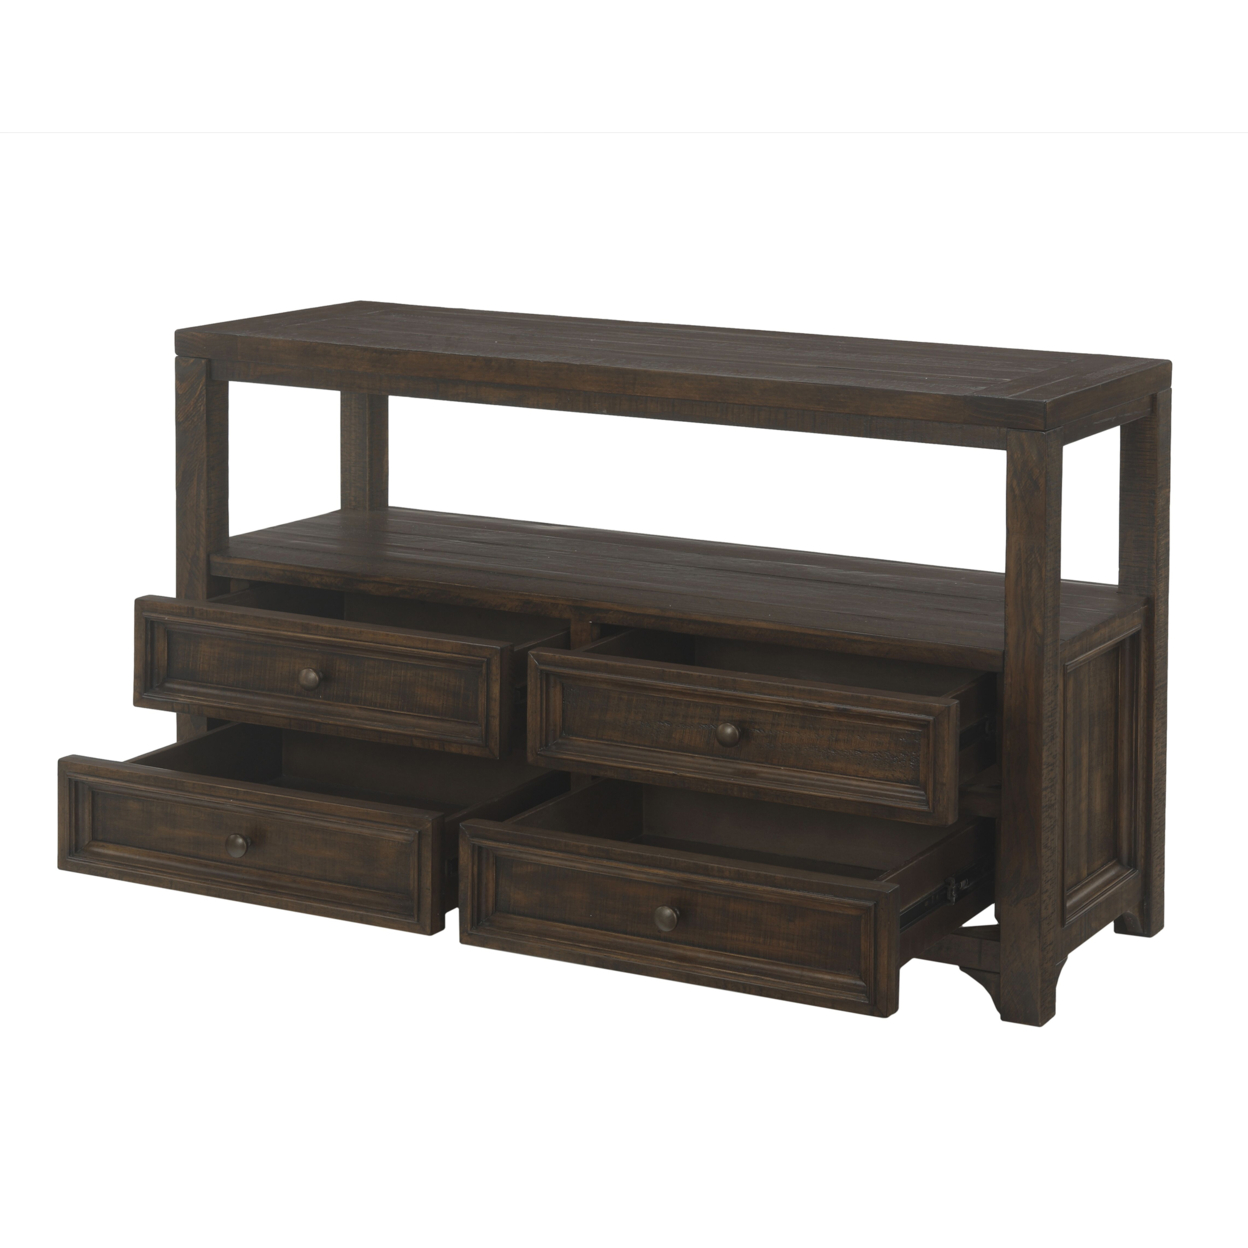 Rectangular Wooden Console Table With 4 Drawers And 1 Open Shelf, Brown- Saltoro Sherpi